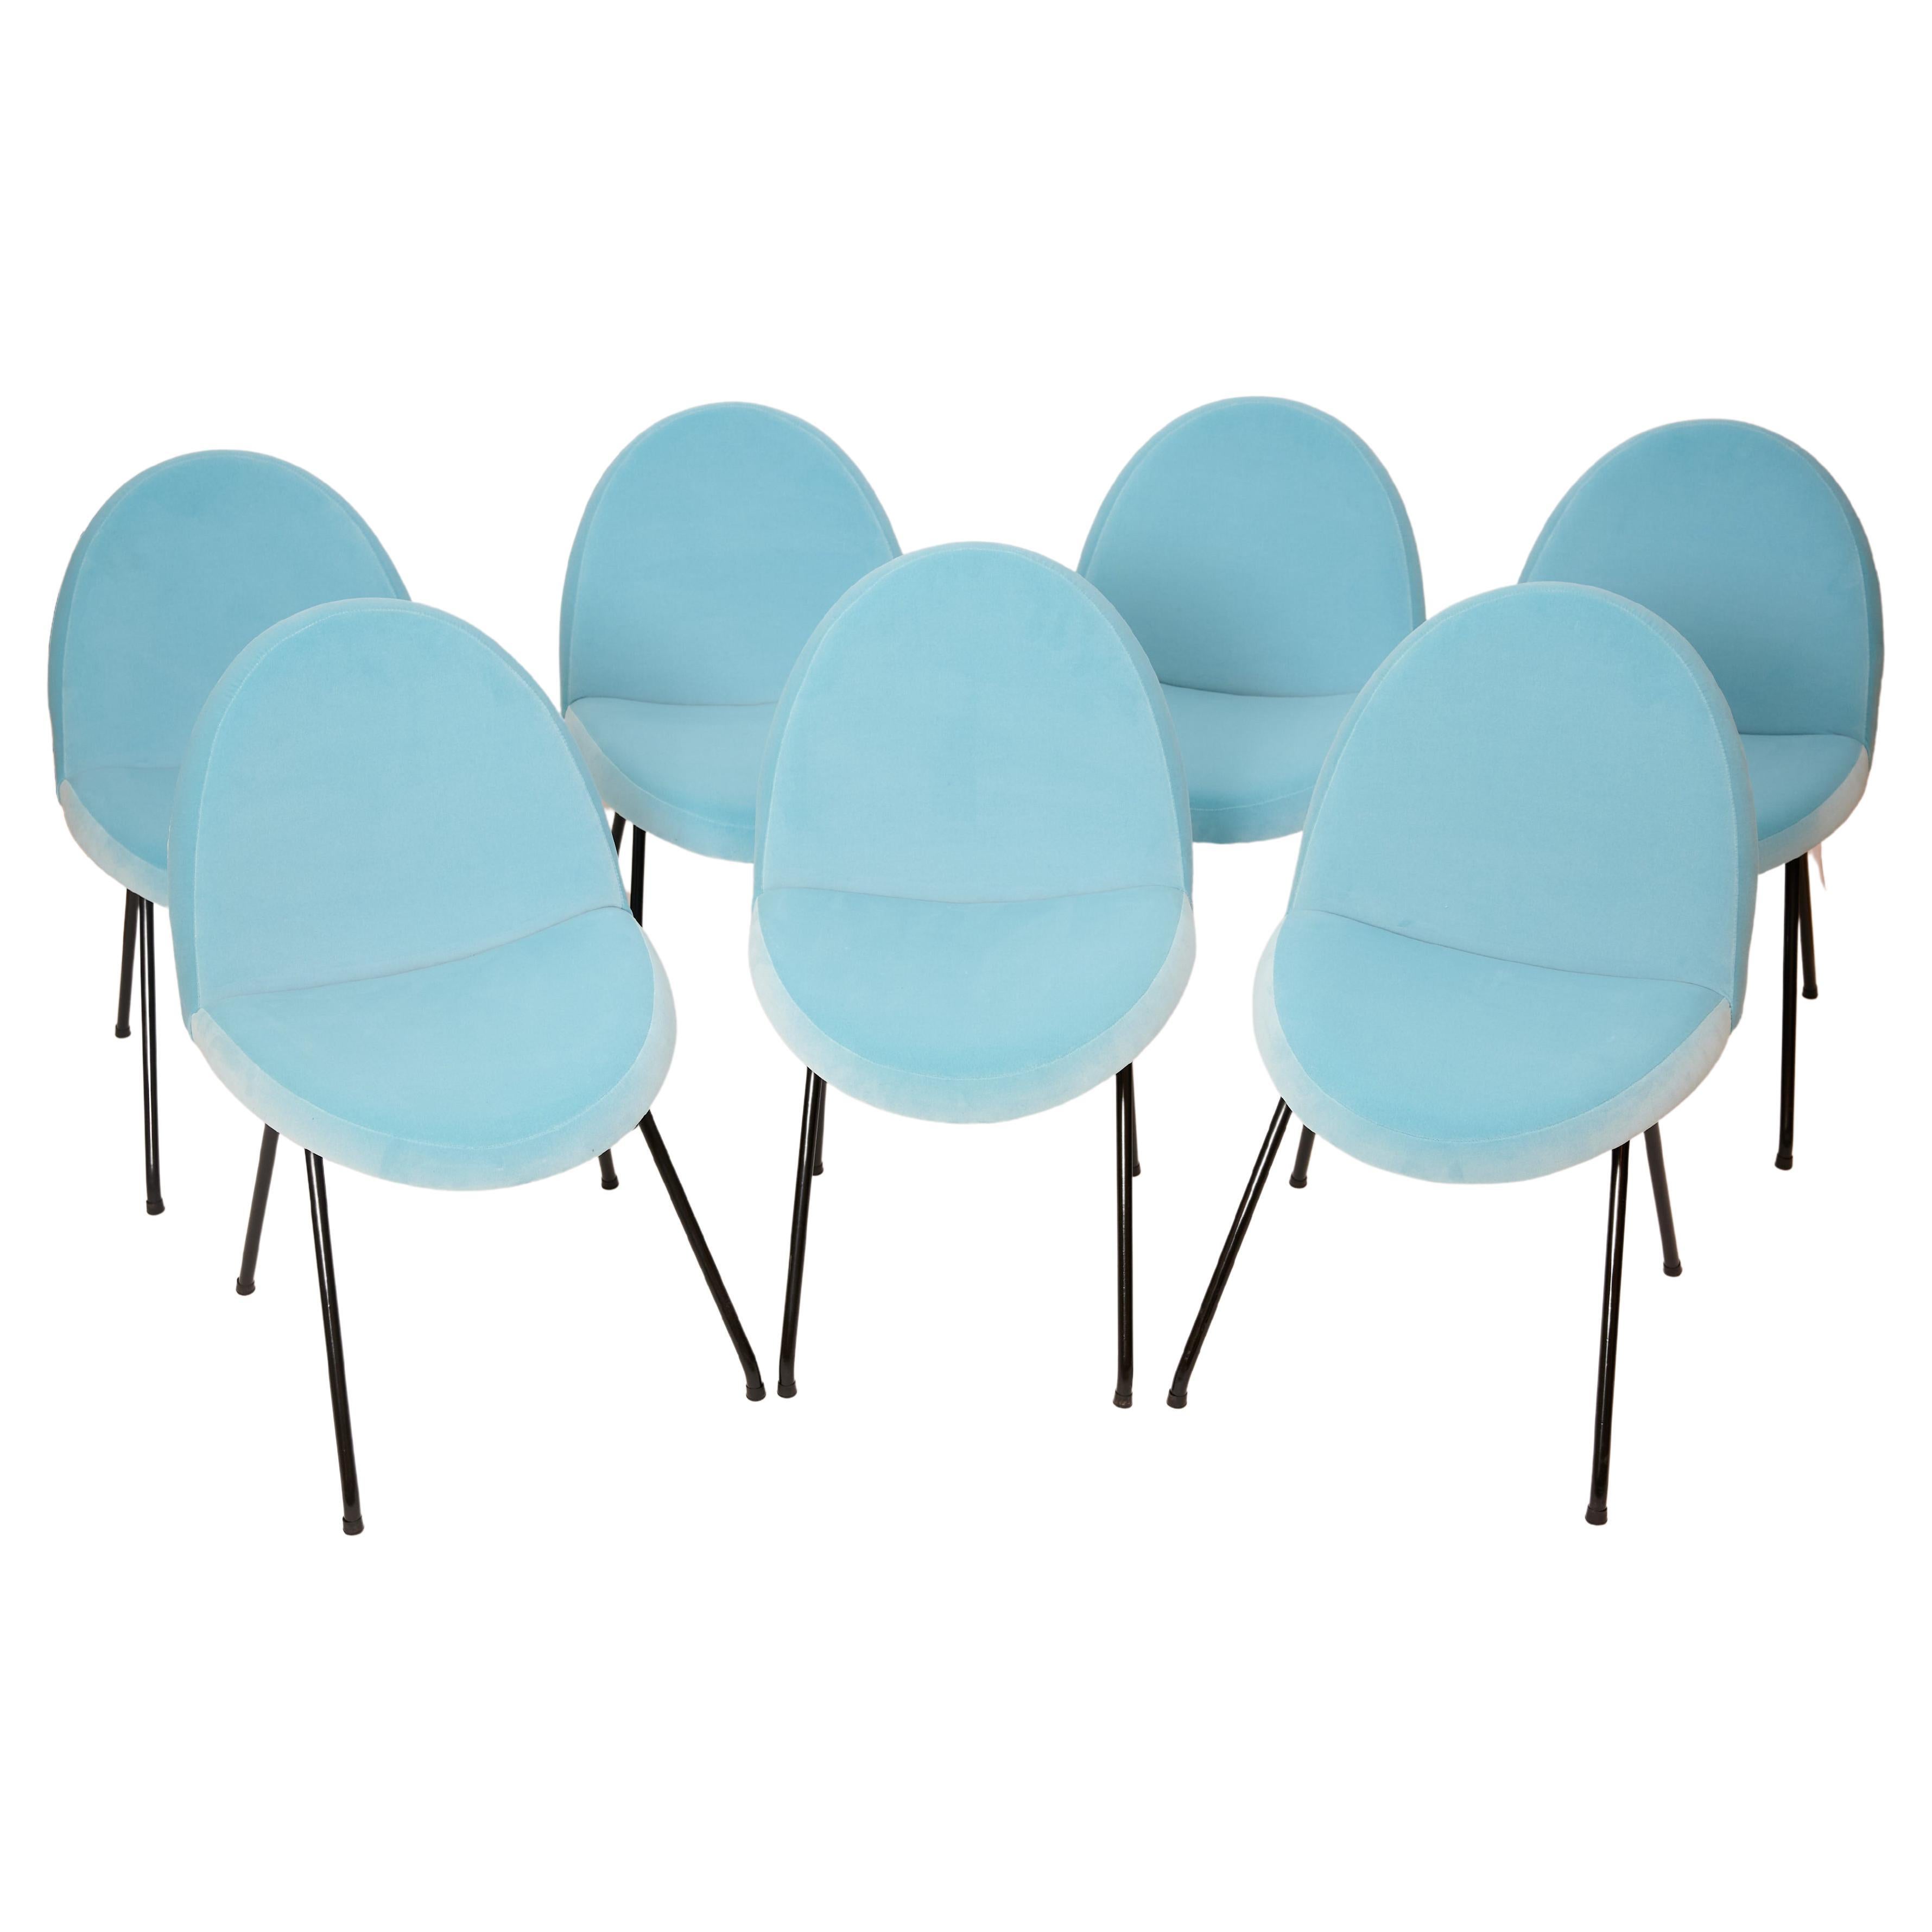 Eight Joseph-Andre Motte 'Tongue' Chairs for Steiner, France C1954